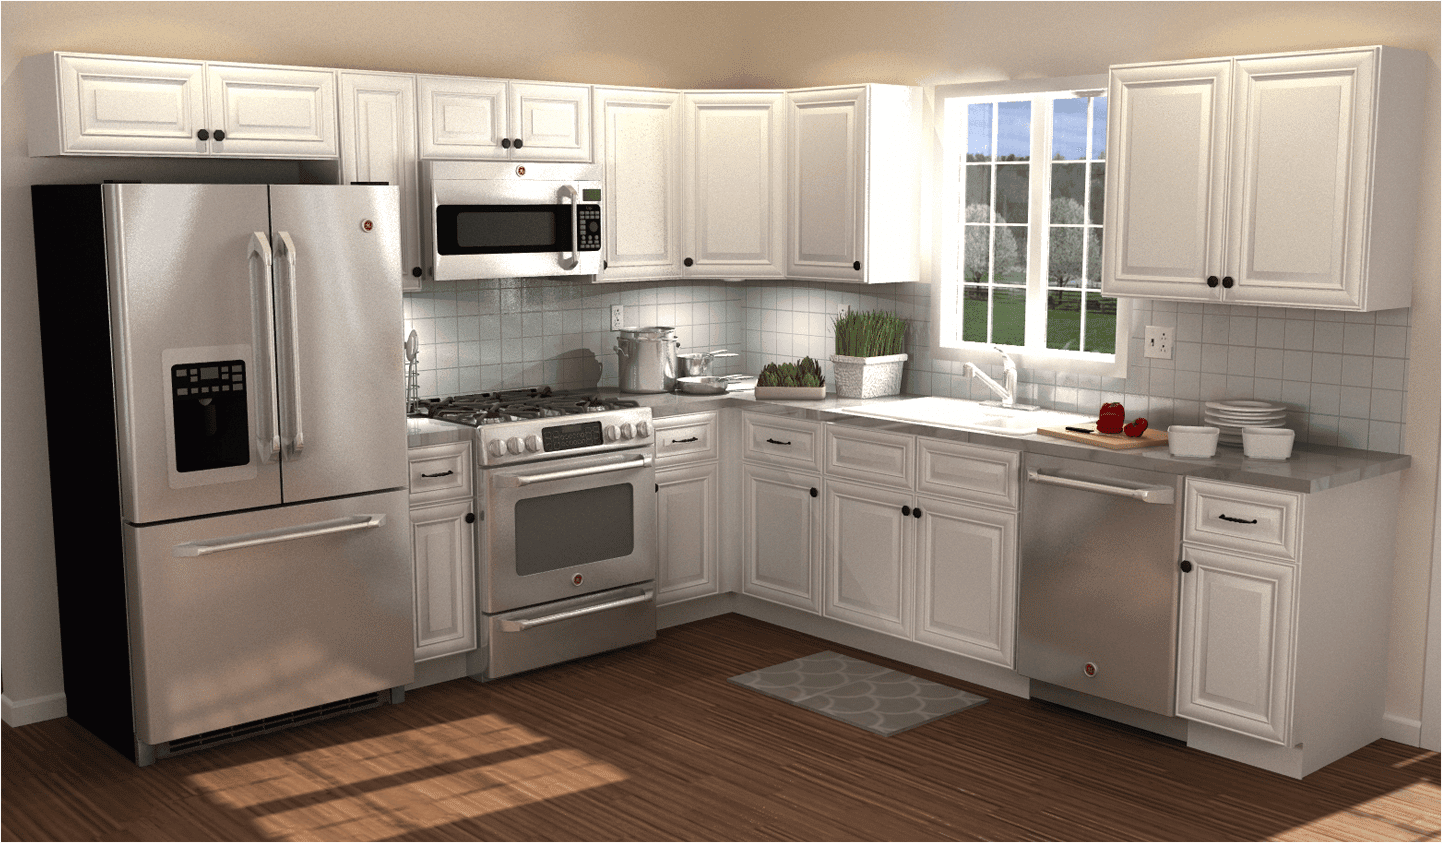 The 10' x 10' Kitchen and Why the Linear Foot Price for Cabinetry is a